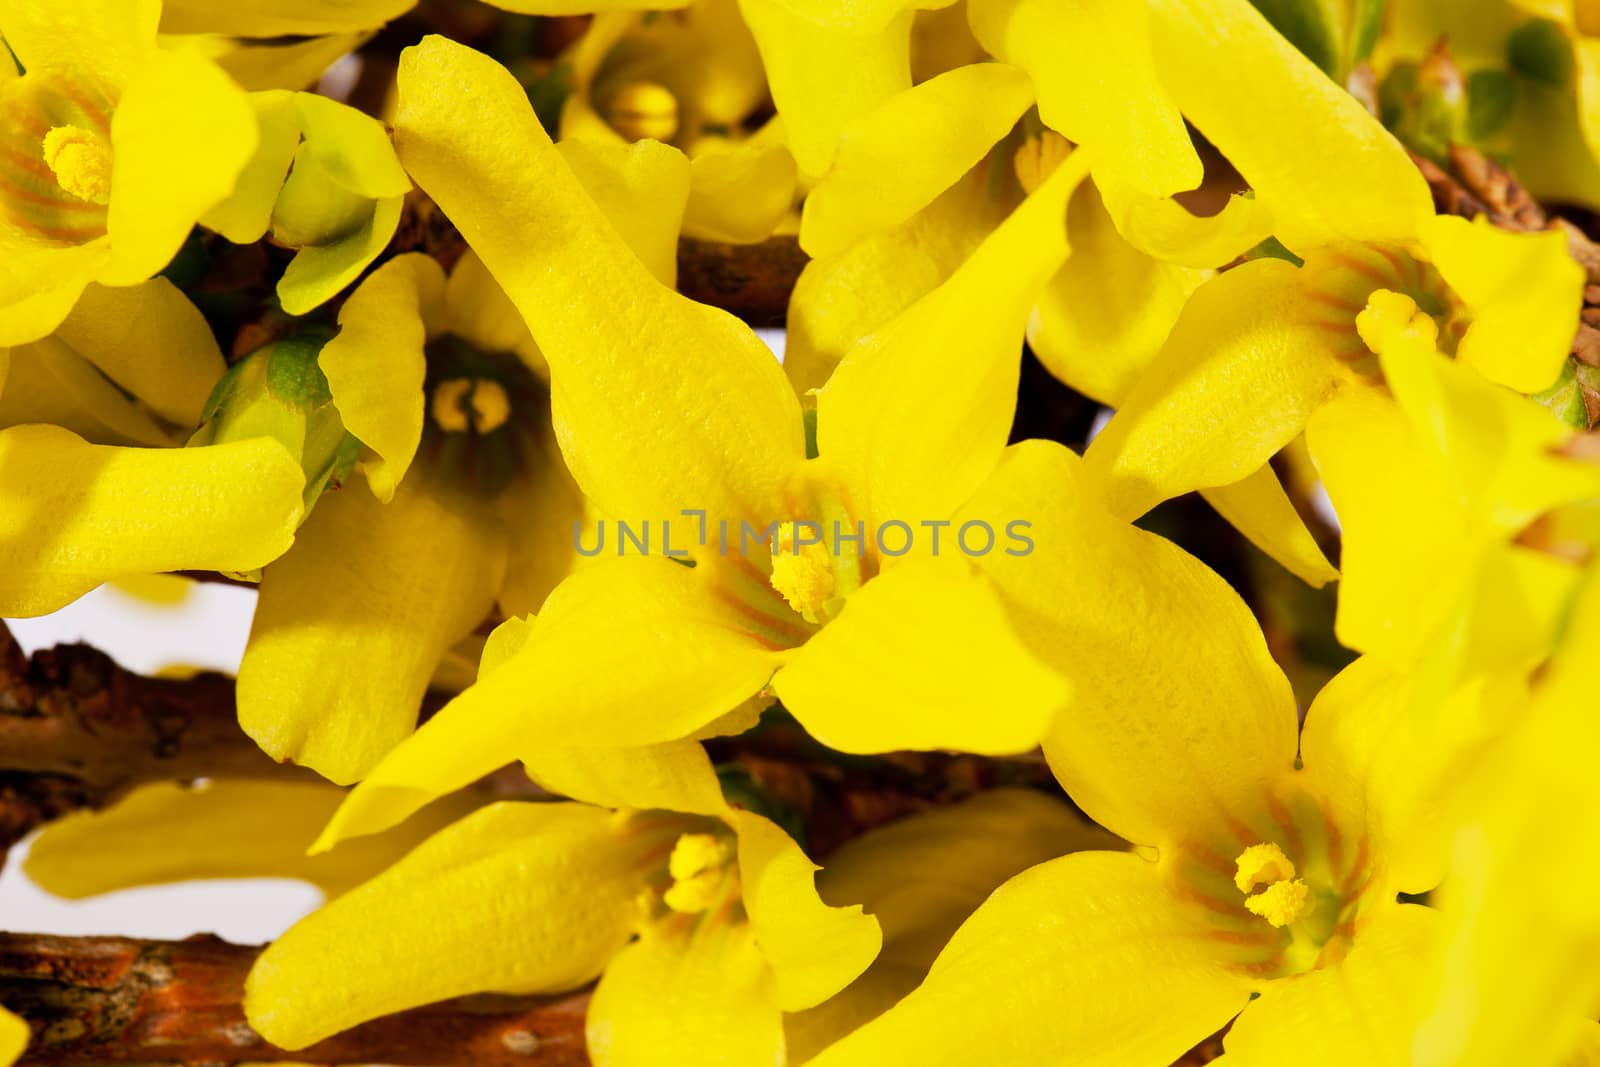 flowers of spring yellow  forsythia close up